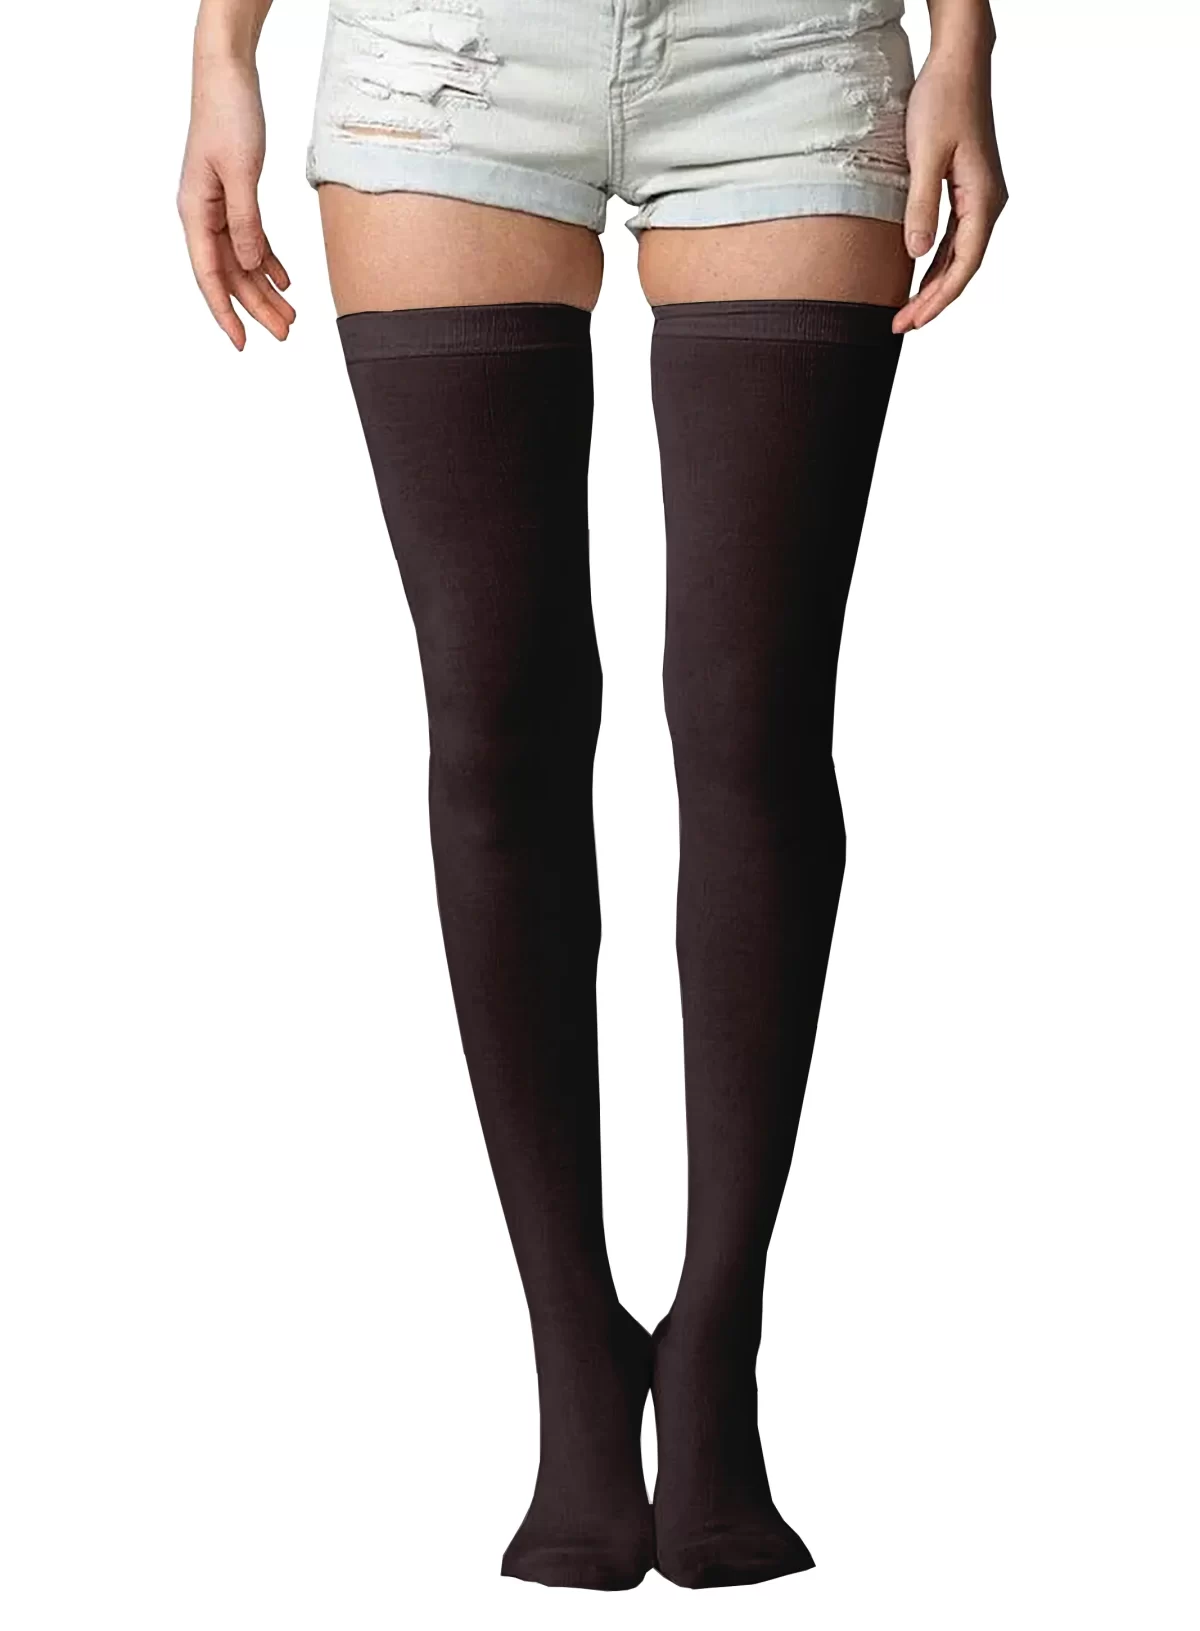 Brown Black Girls and Women's Thigh High Socks ( Free Size )4